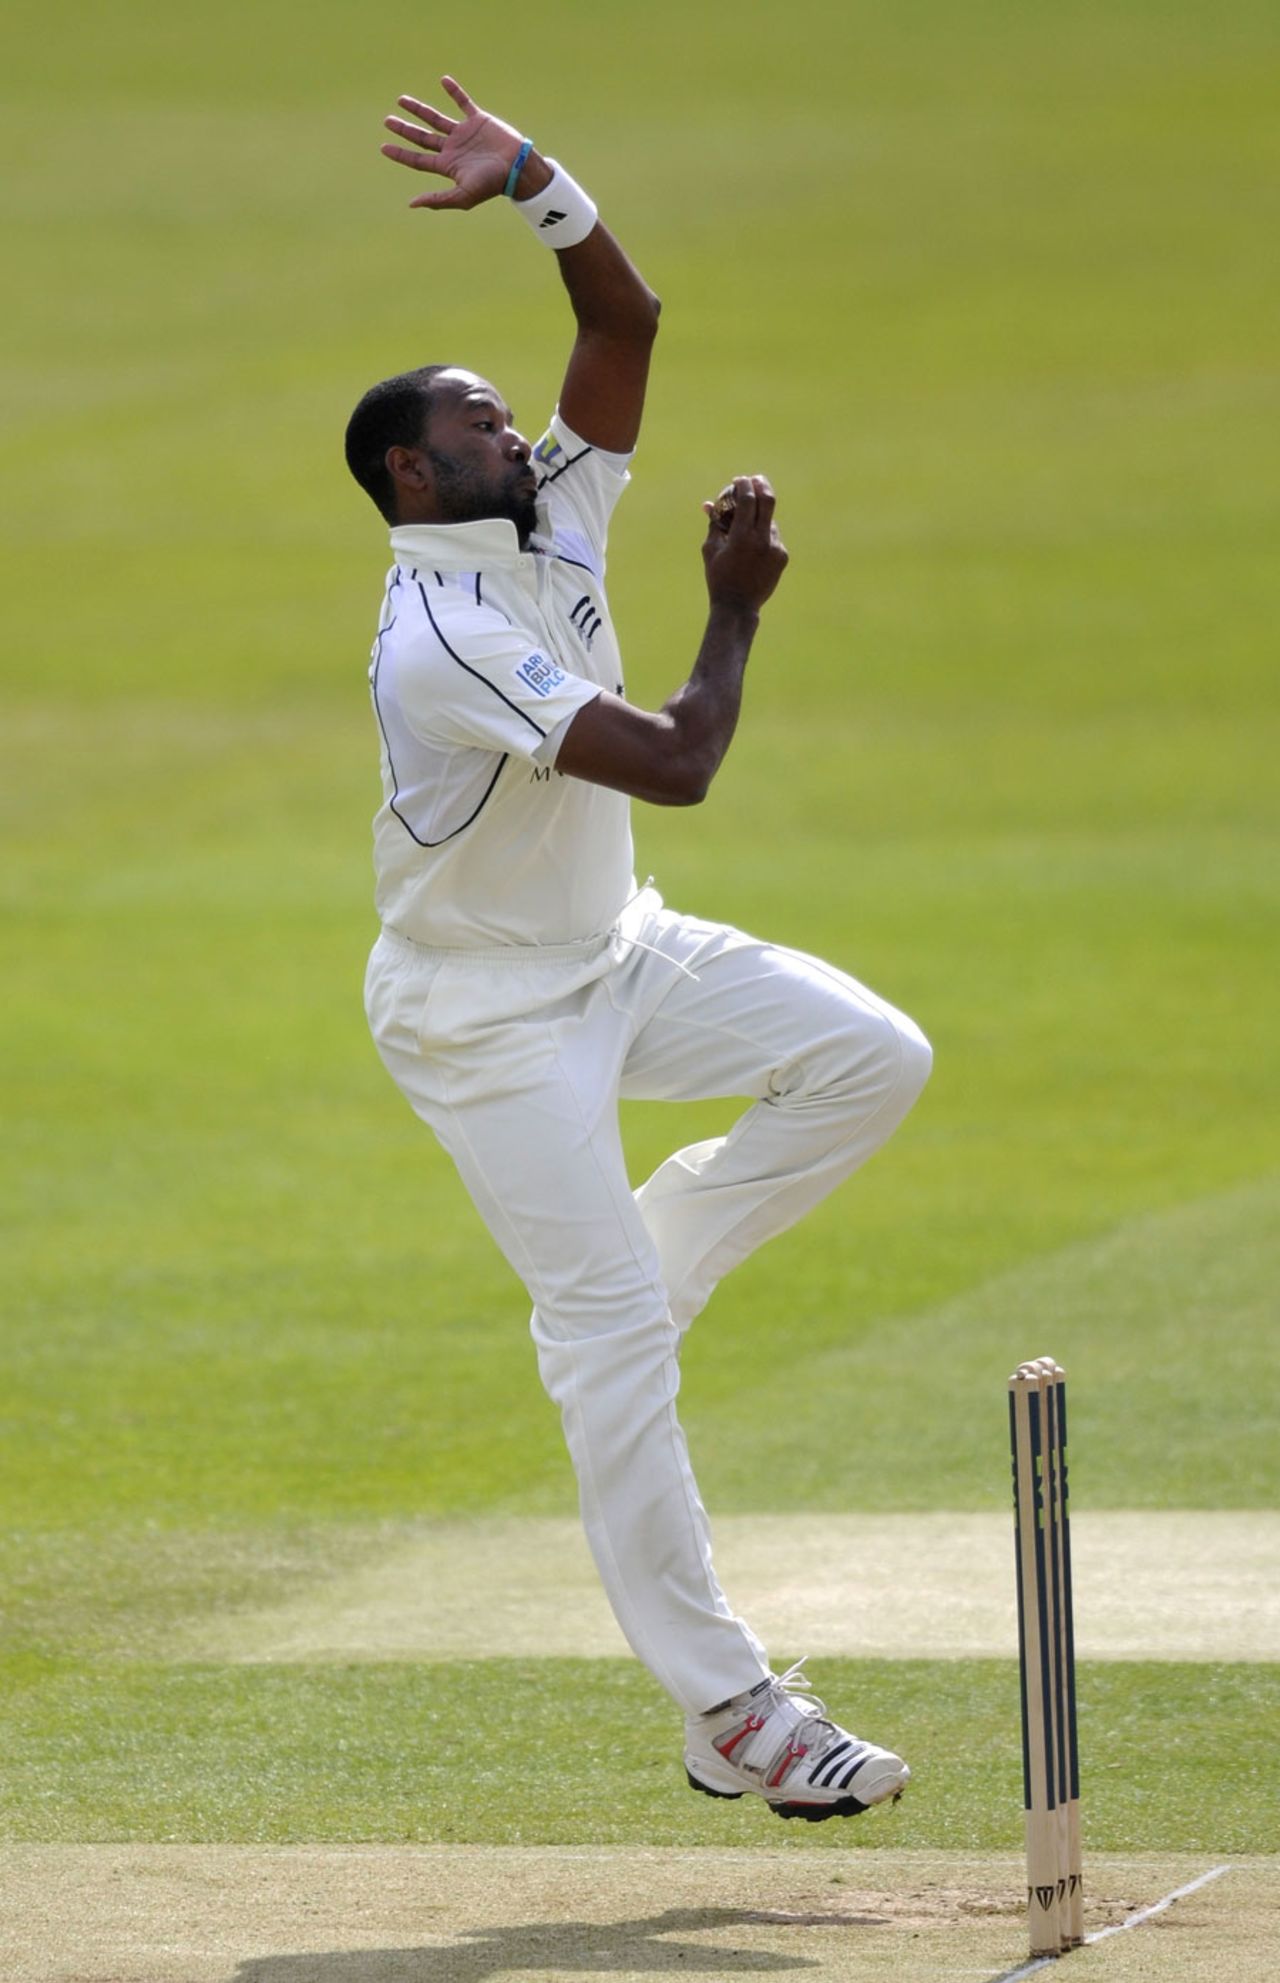 Corey Collymore in his delivery stride, Middlesex v Surrey, County Championship, Division One, April 12-15, 2012